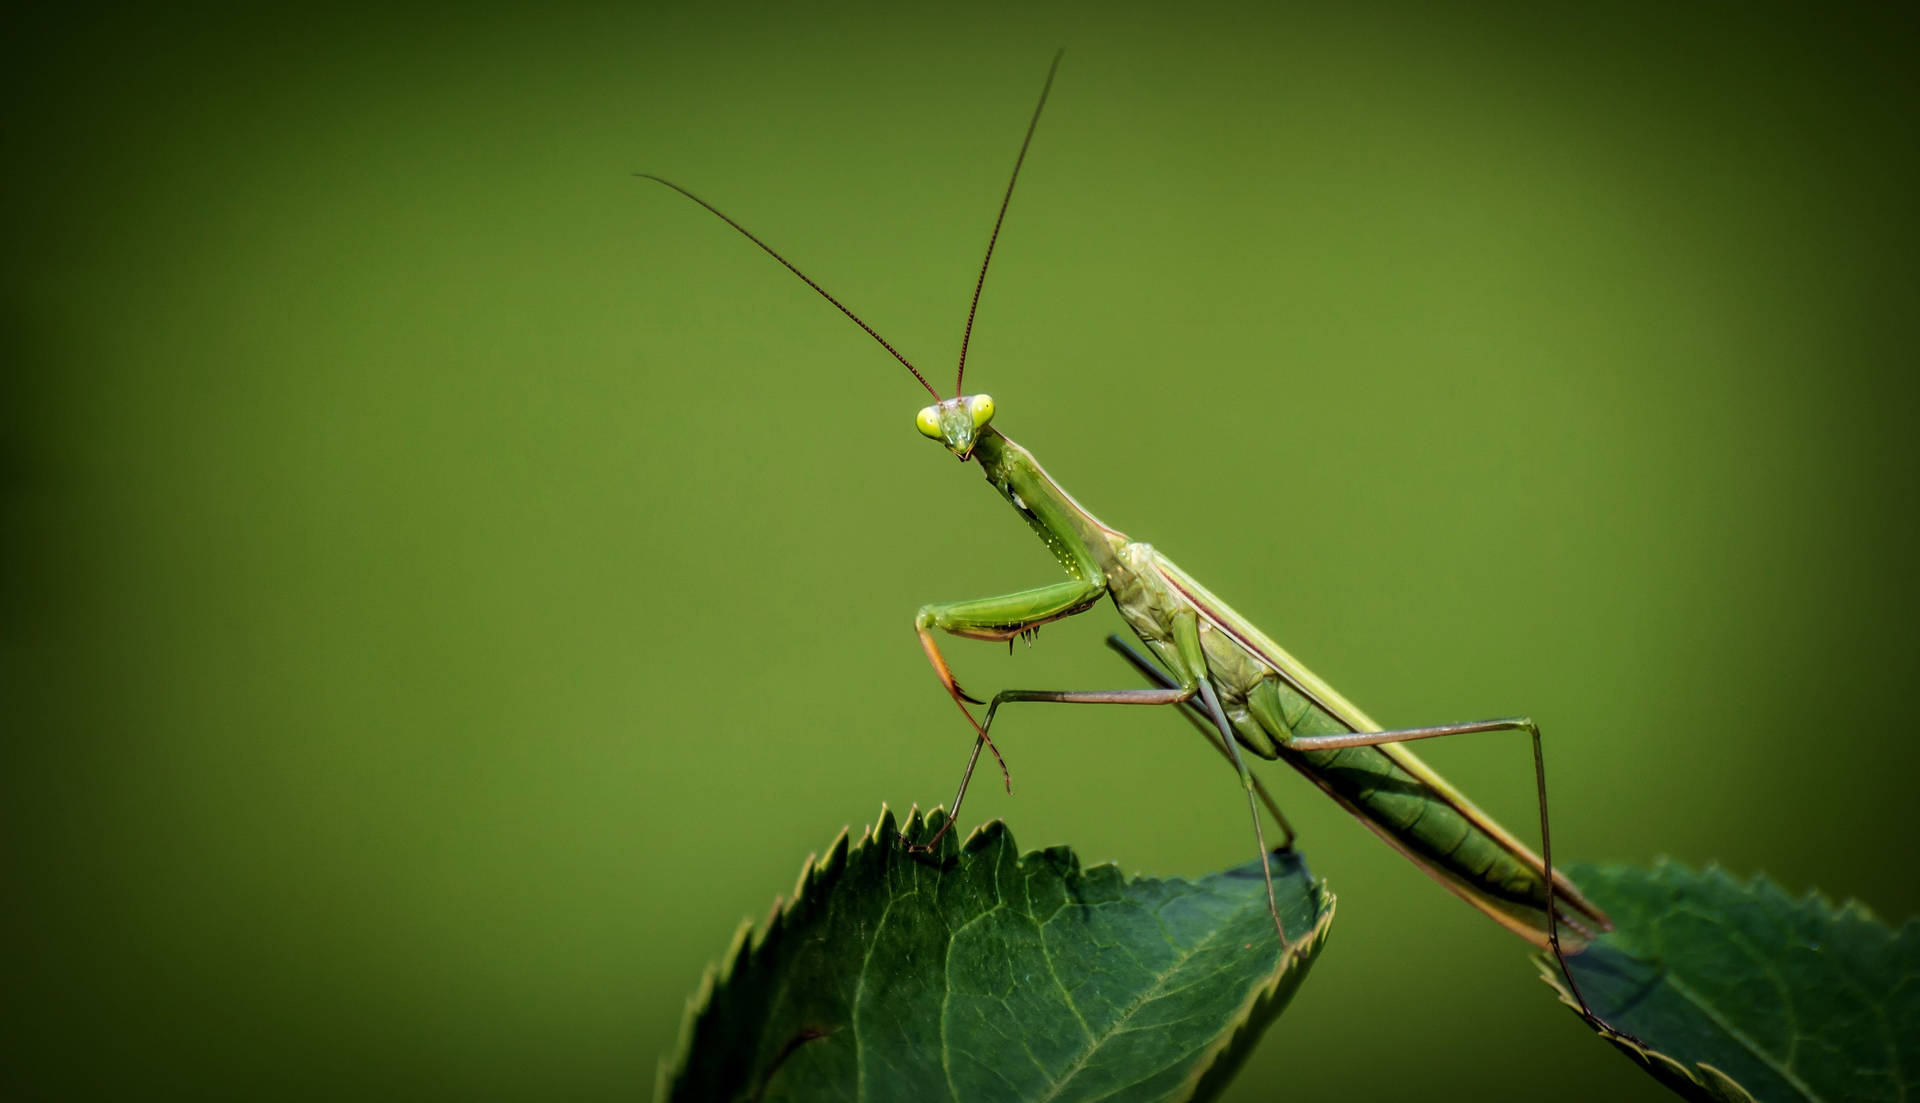 "Meditative Insect - The Magnificent Praying Mantis" Wallpaper